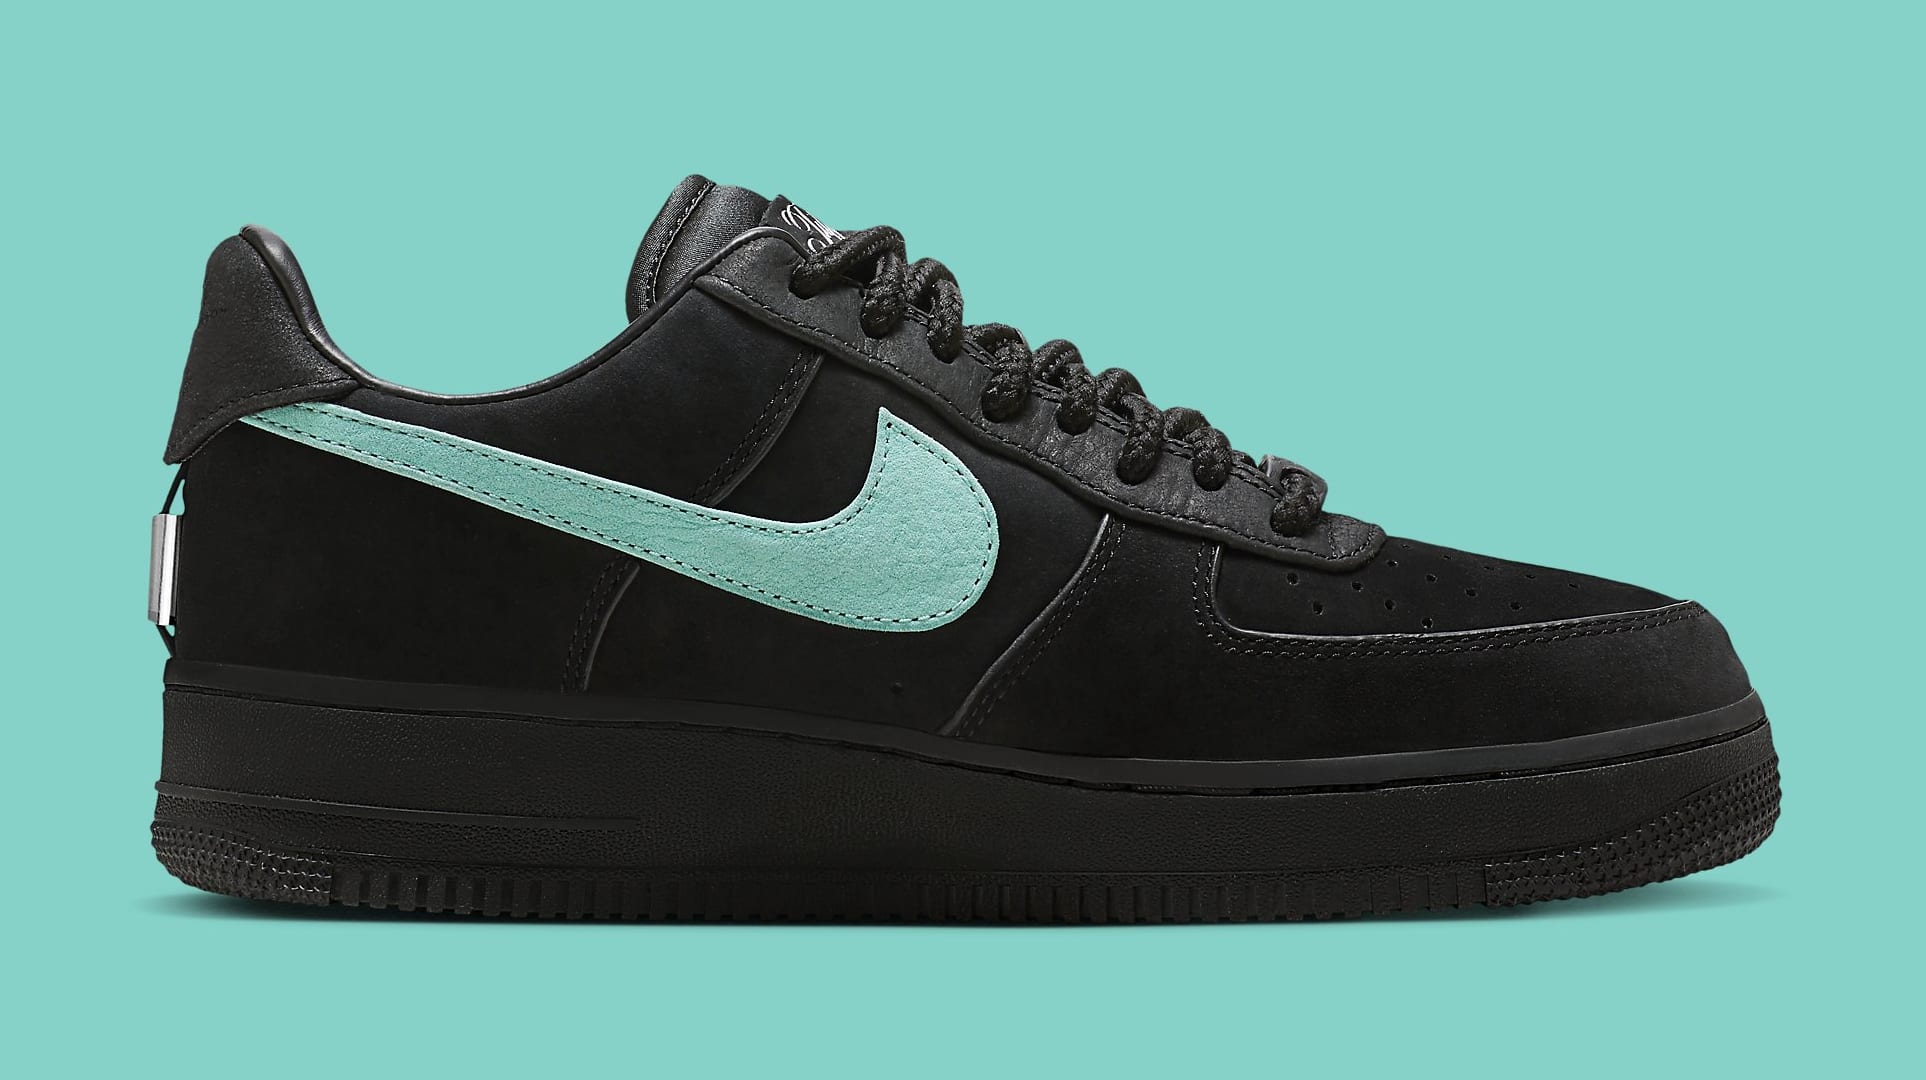 Tiffany &amp; Co. x Nike Air Force 1 Low DZ1382 001 Medial